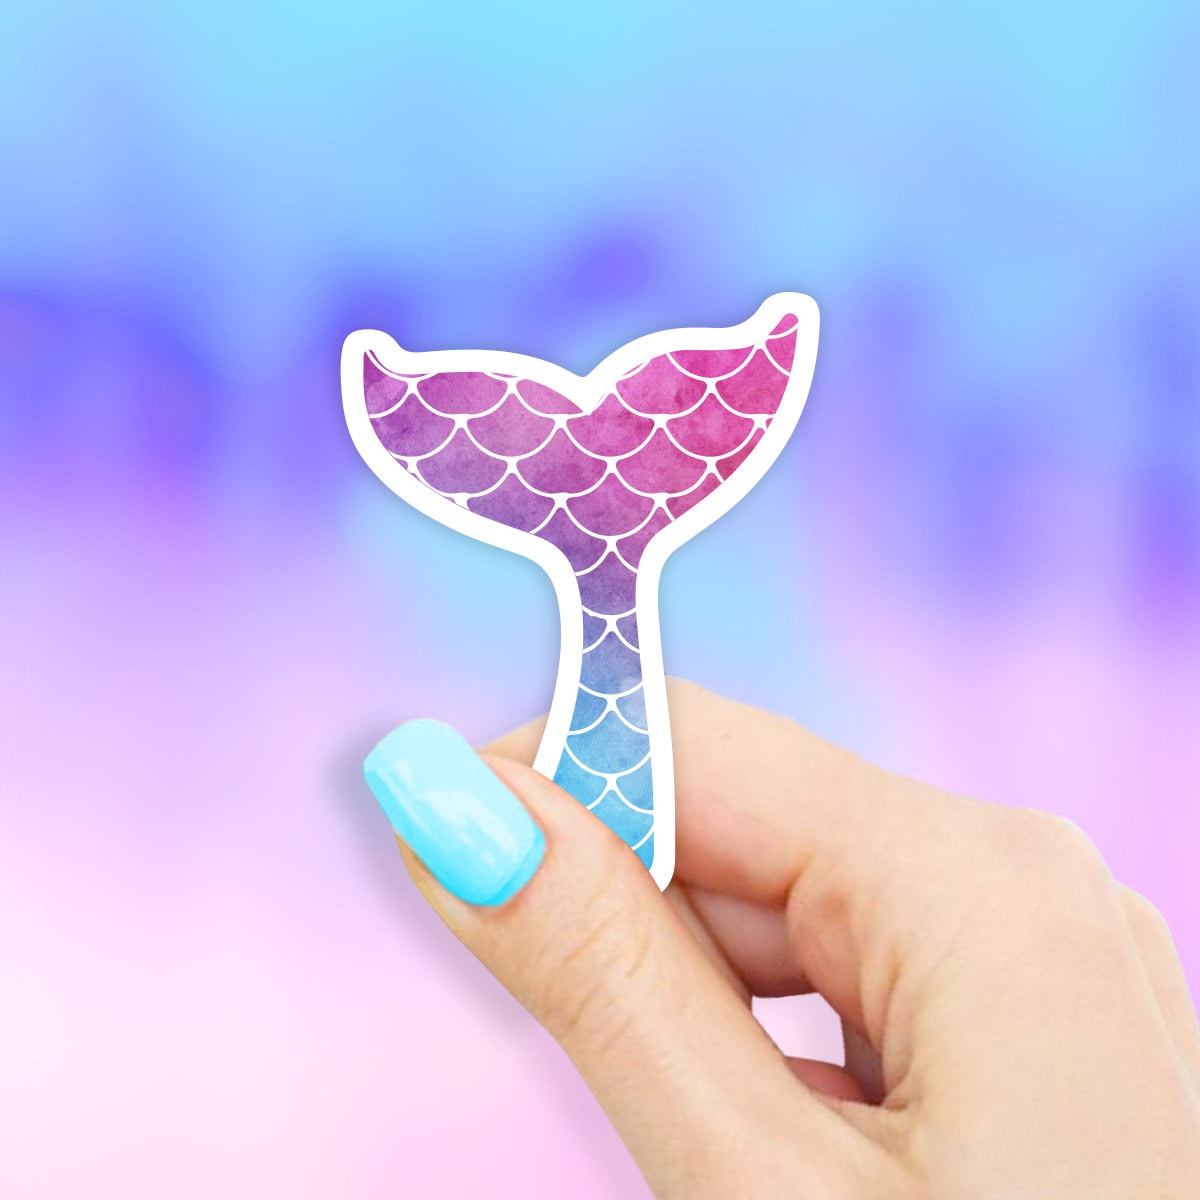 Colorful Mermaid Tail Sticker Decal